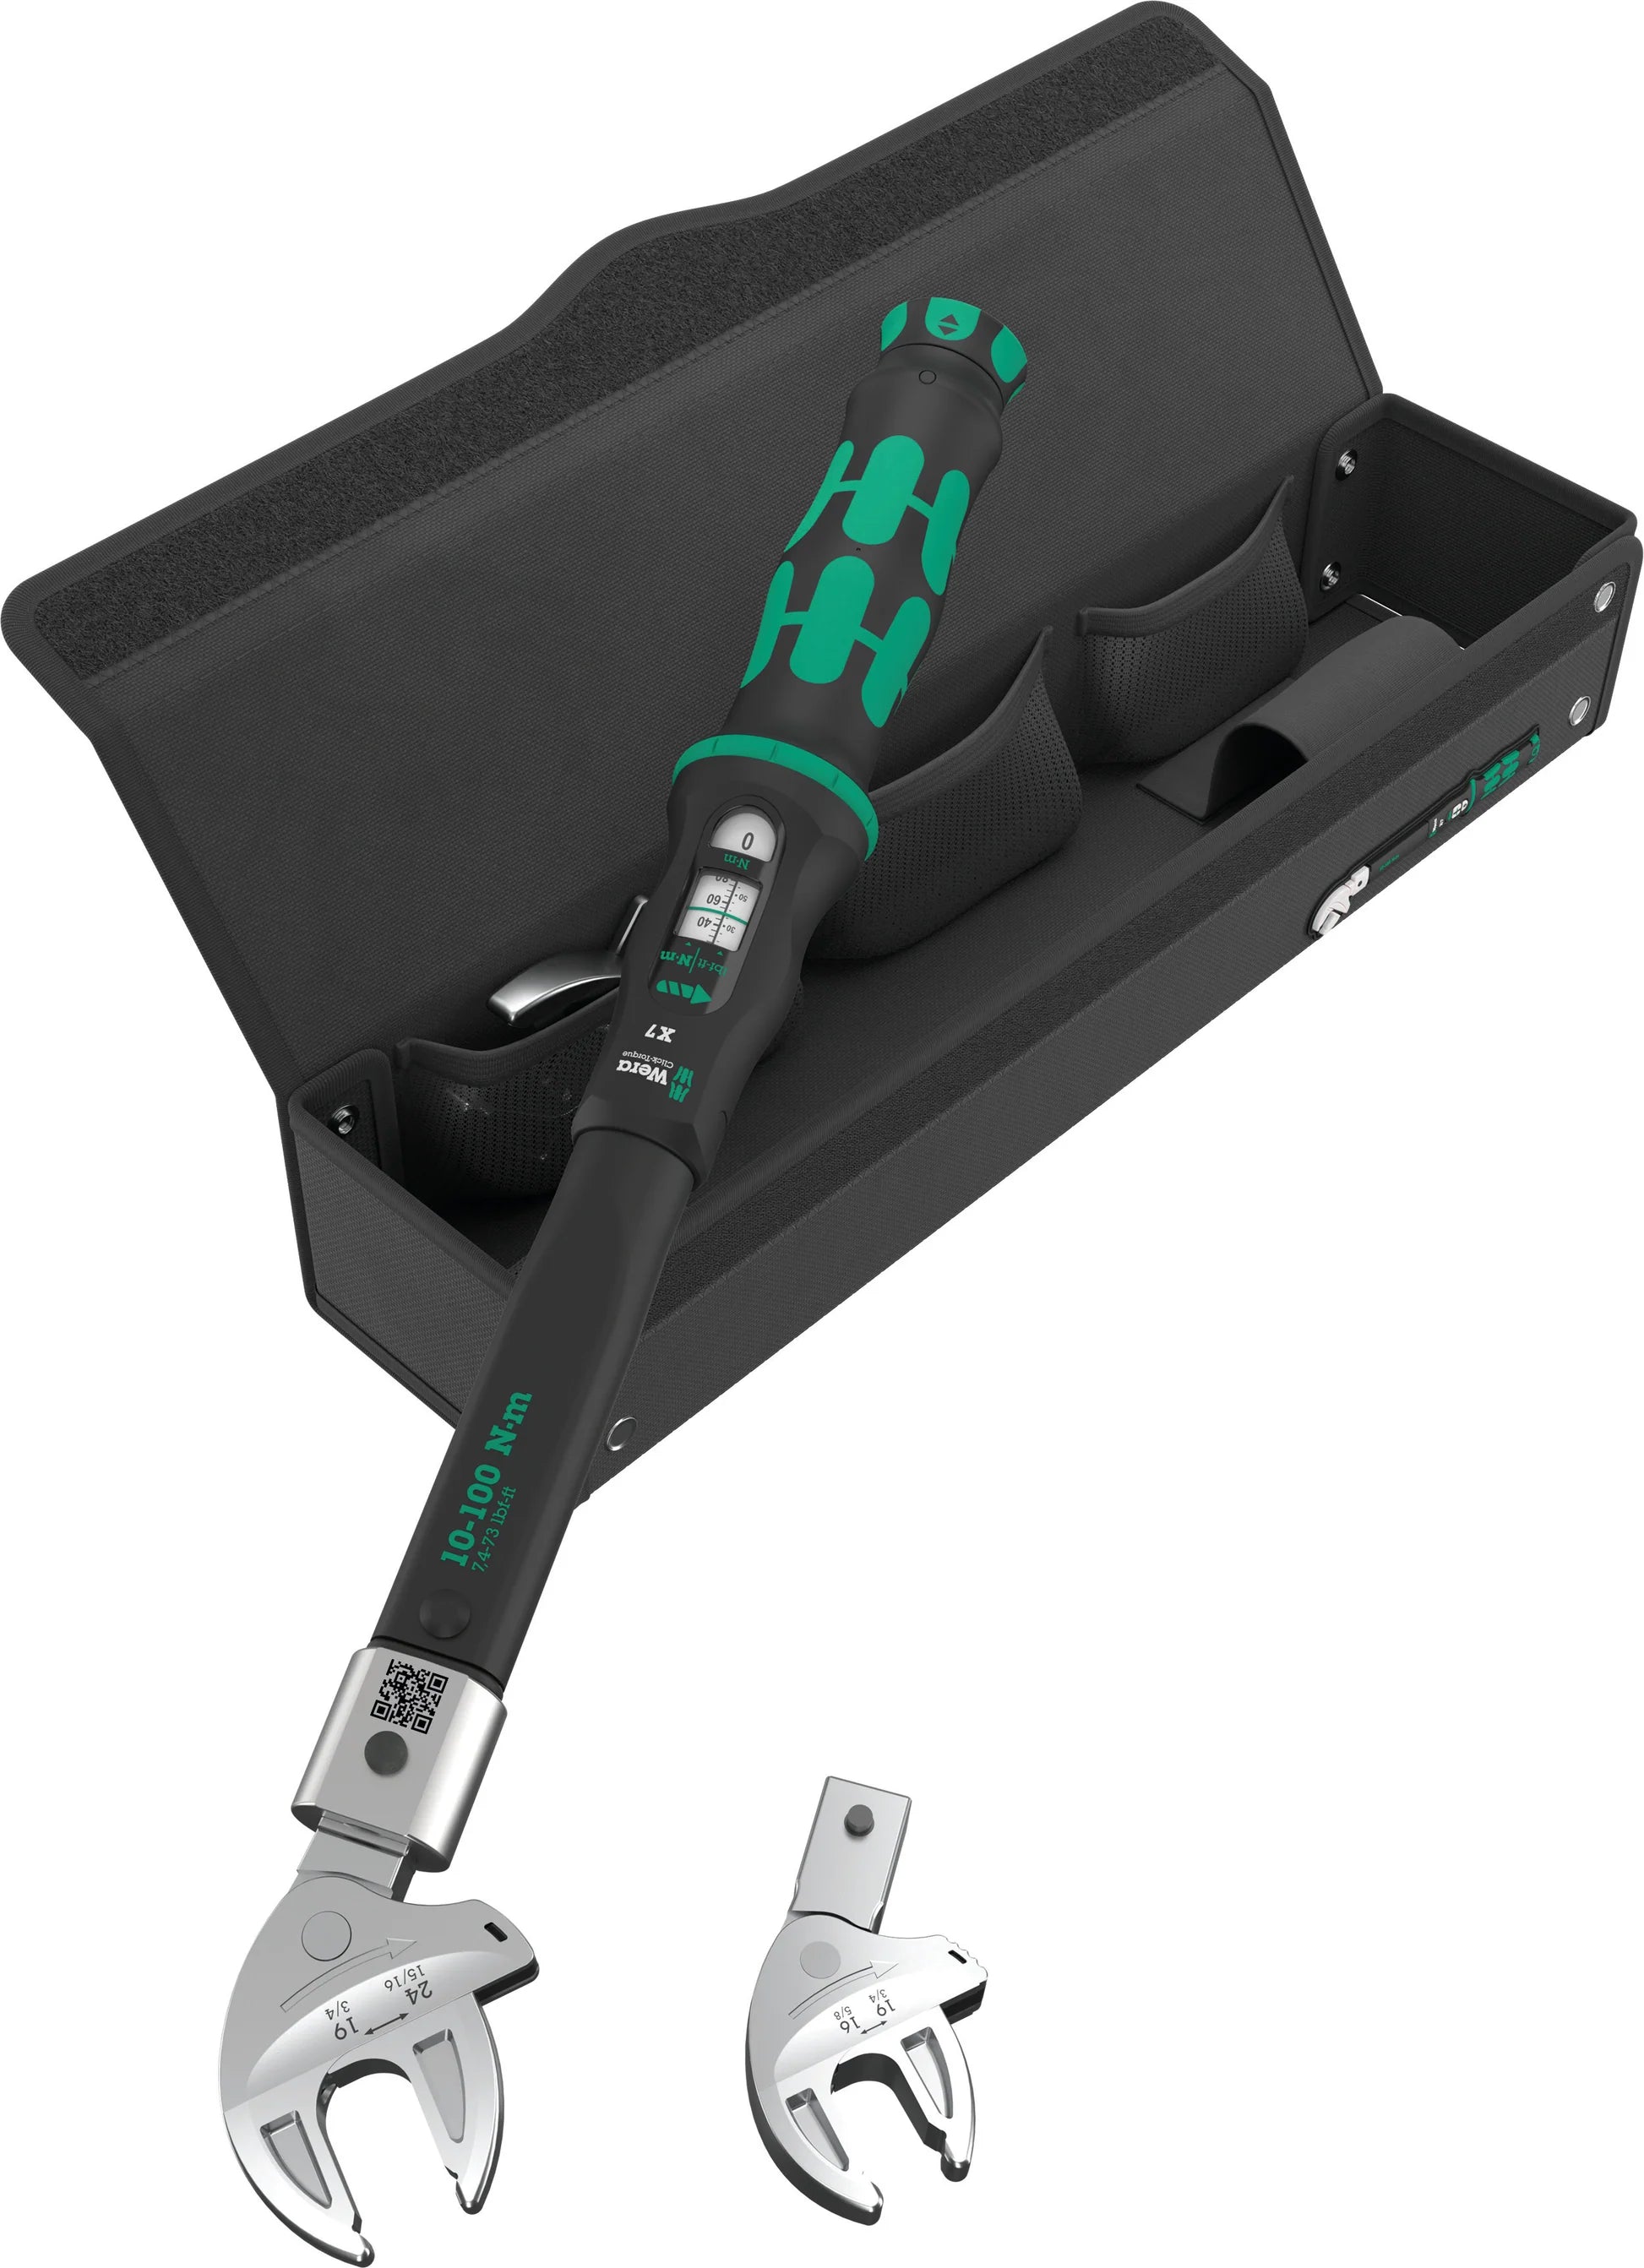 Wera 9530 Torque wrench set for HVAC heat pumps/air conditioning, 4 pieces (05136076001)